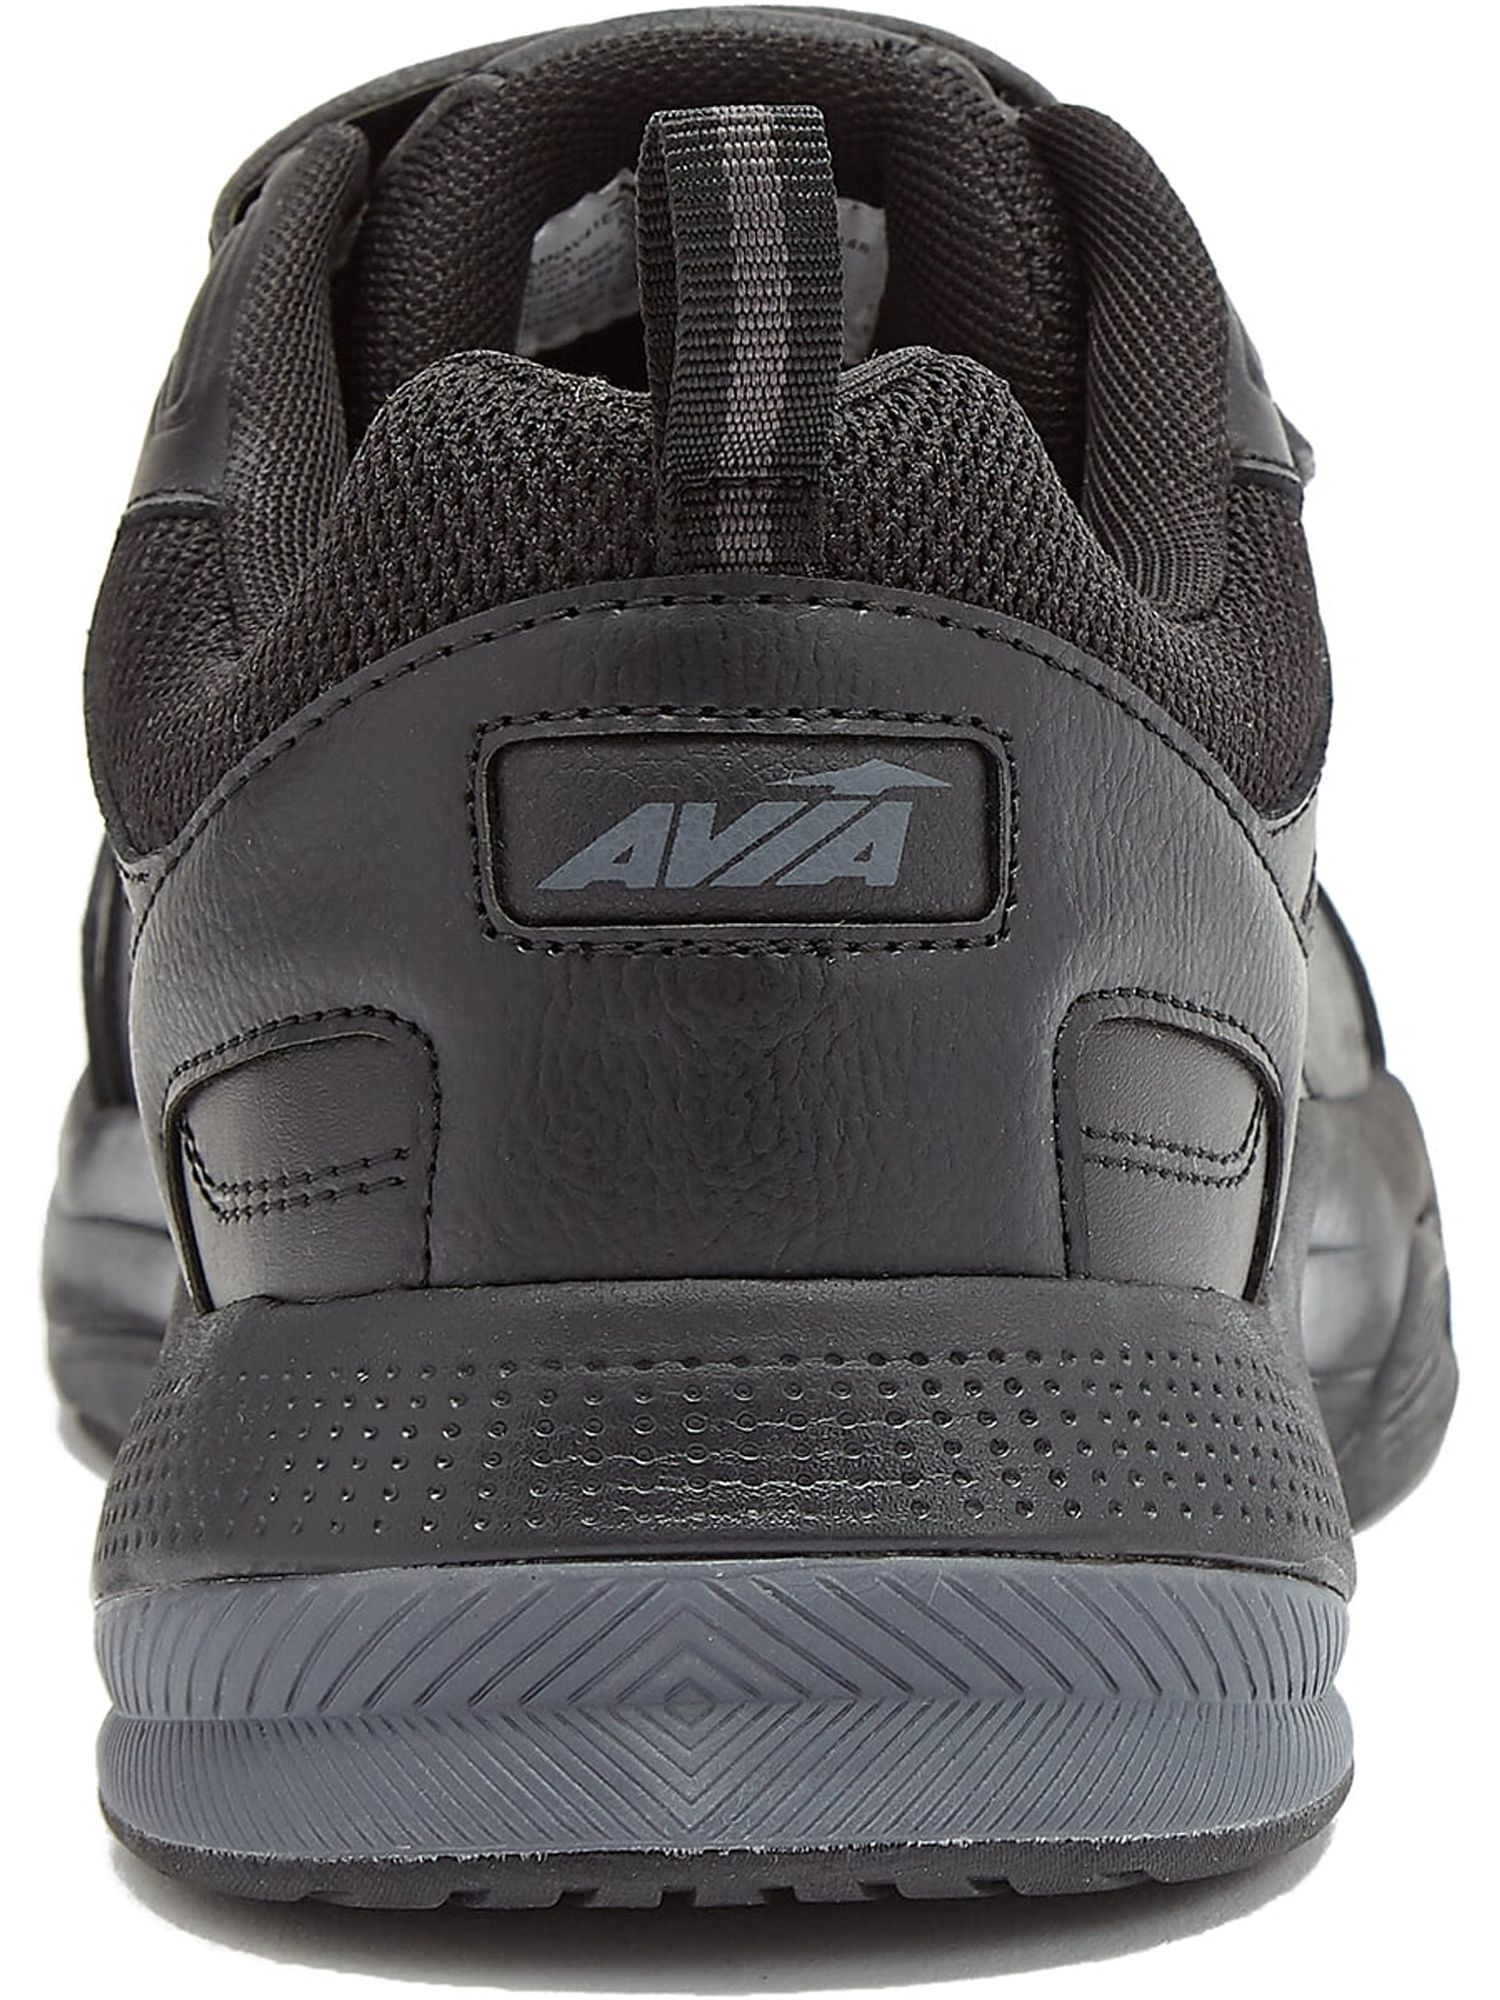 Avia Men's Quickstep Strap Wide Width Walking Shoes - image 4 of 5